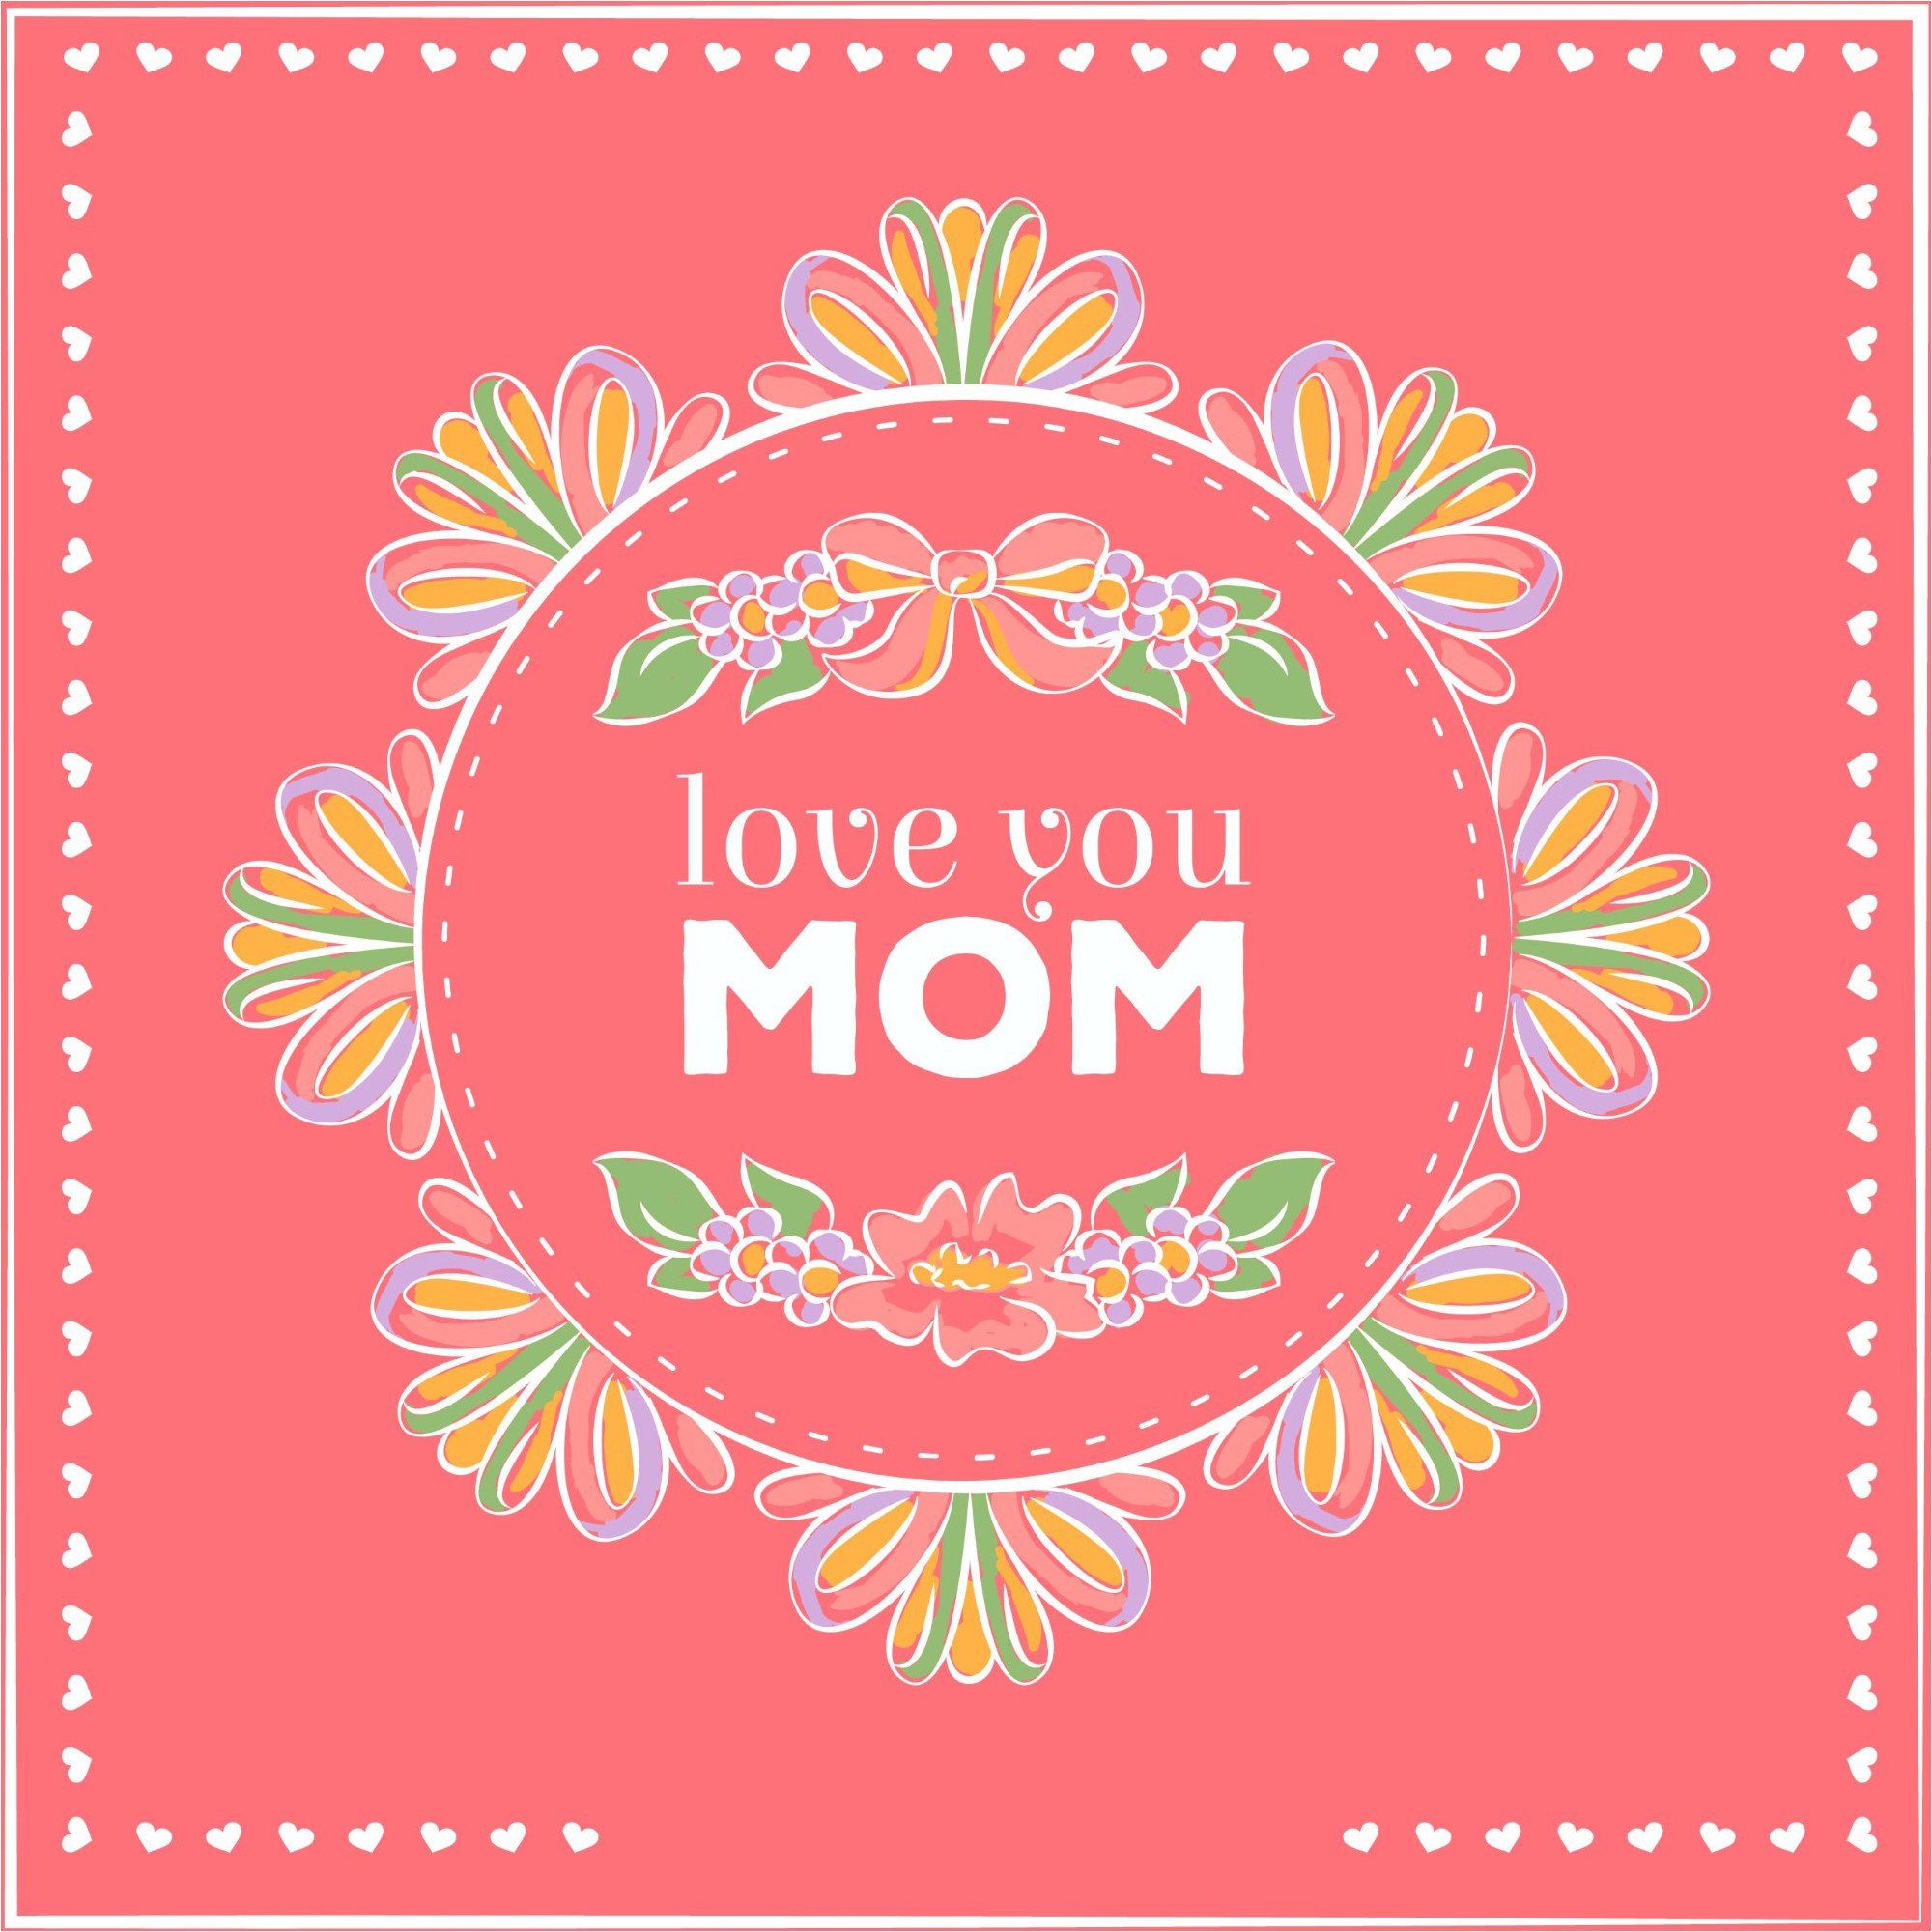 2000x2000 Love You Mom happy Mother's Day Greeting card Design Vector & Wallpaper